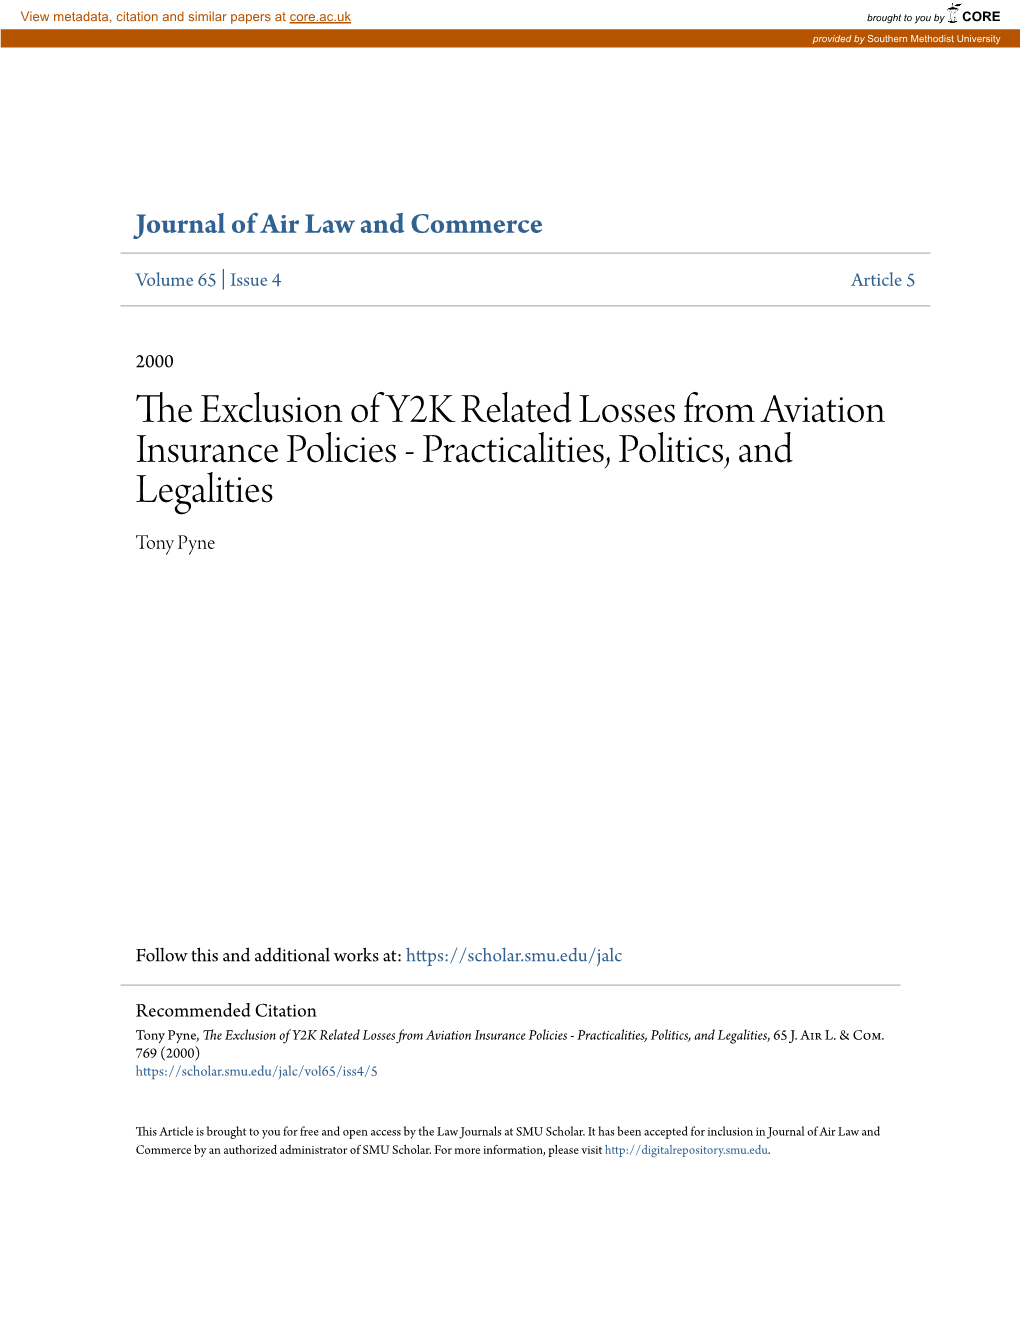 The Exclusion of Y2K Related Losses from Aviation Insurance Policies - Practicalities, Politics, and Legalities Tony Pyne